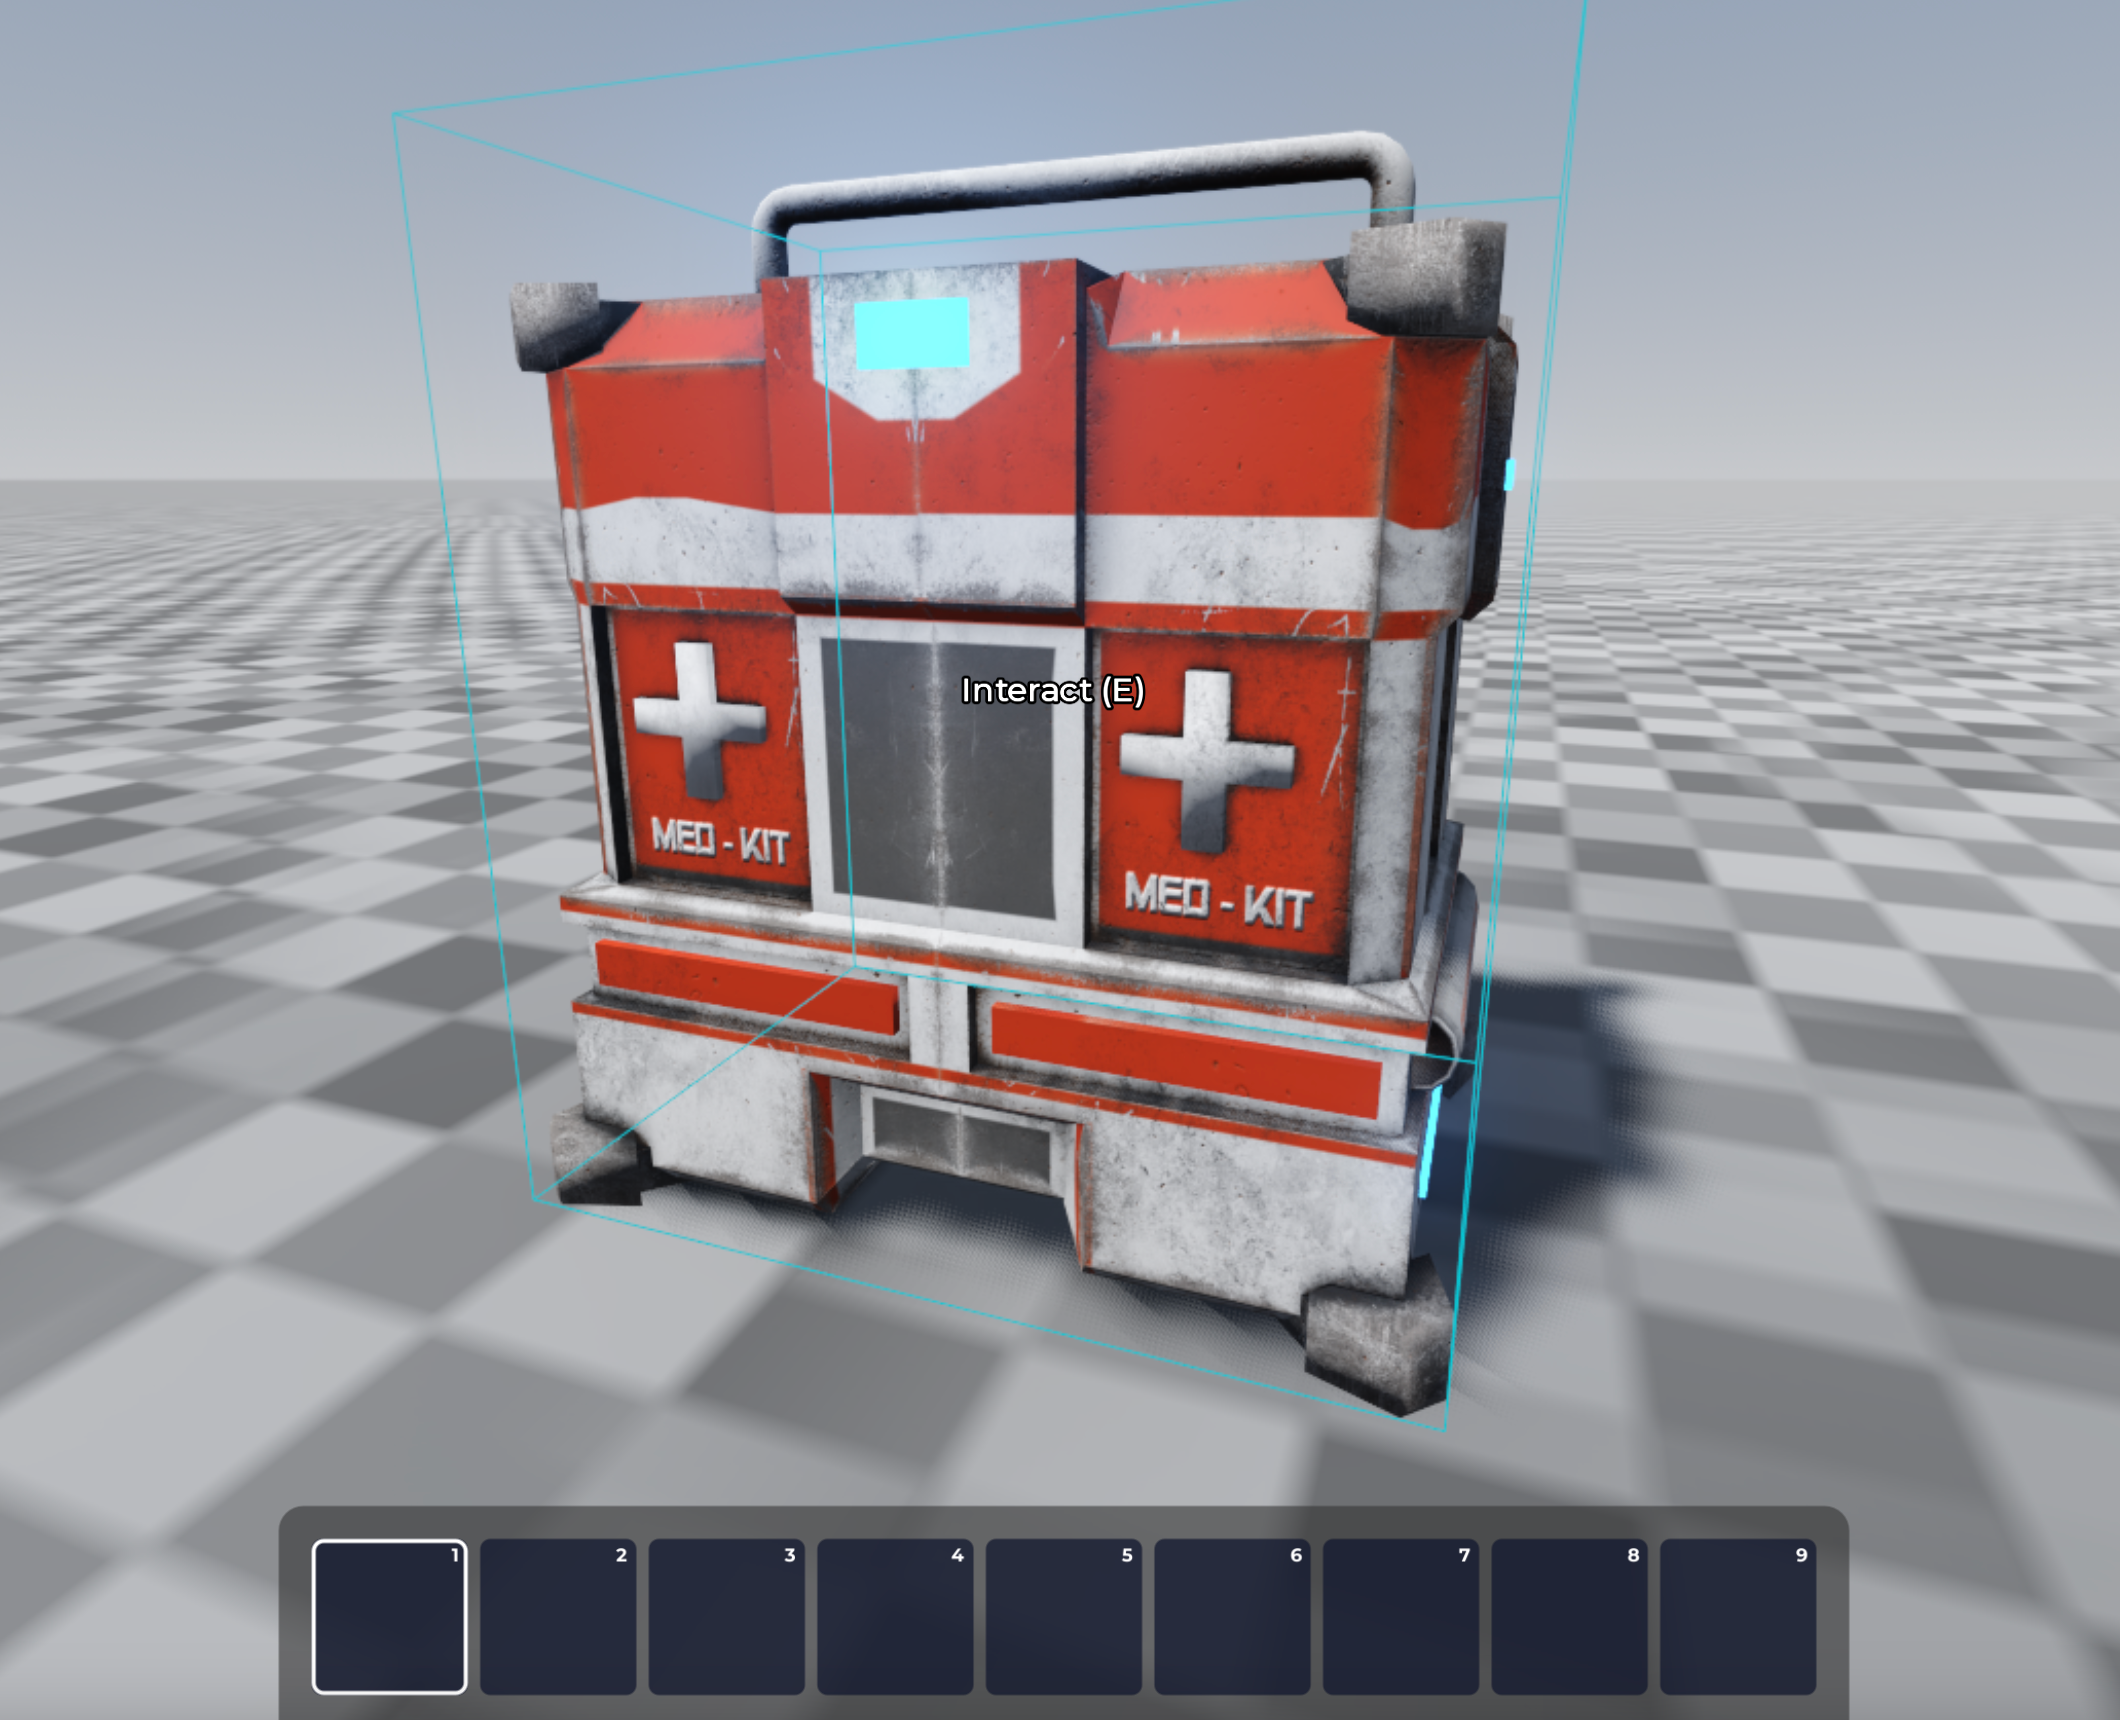 Interacting with the scripted medkit object